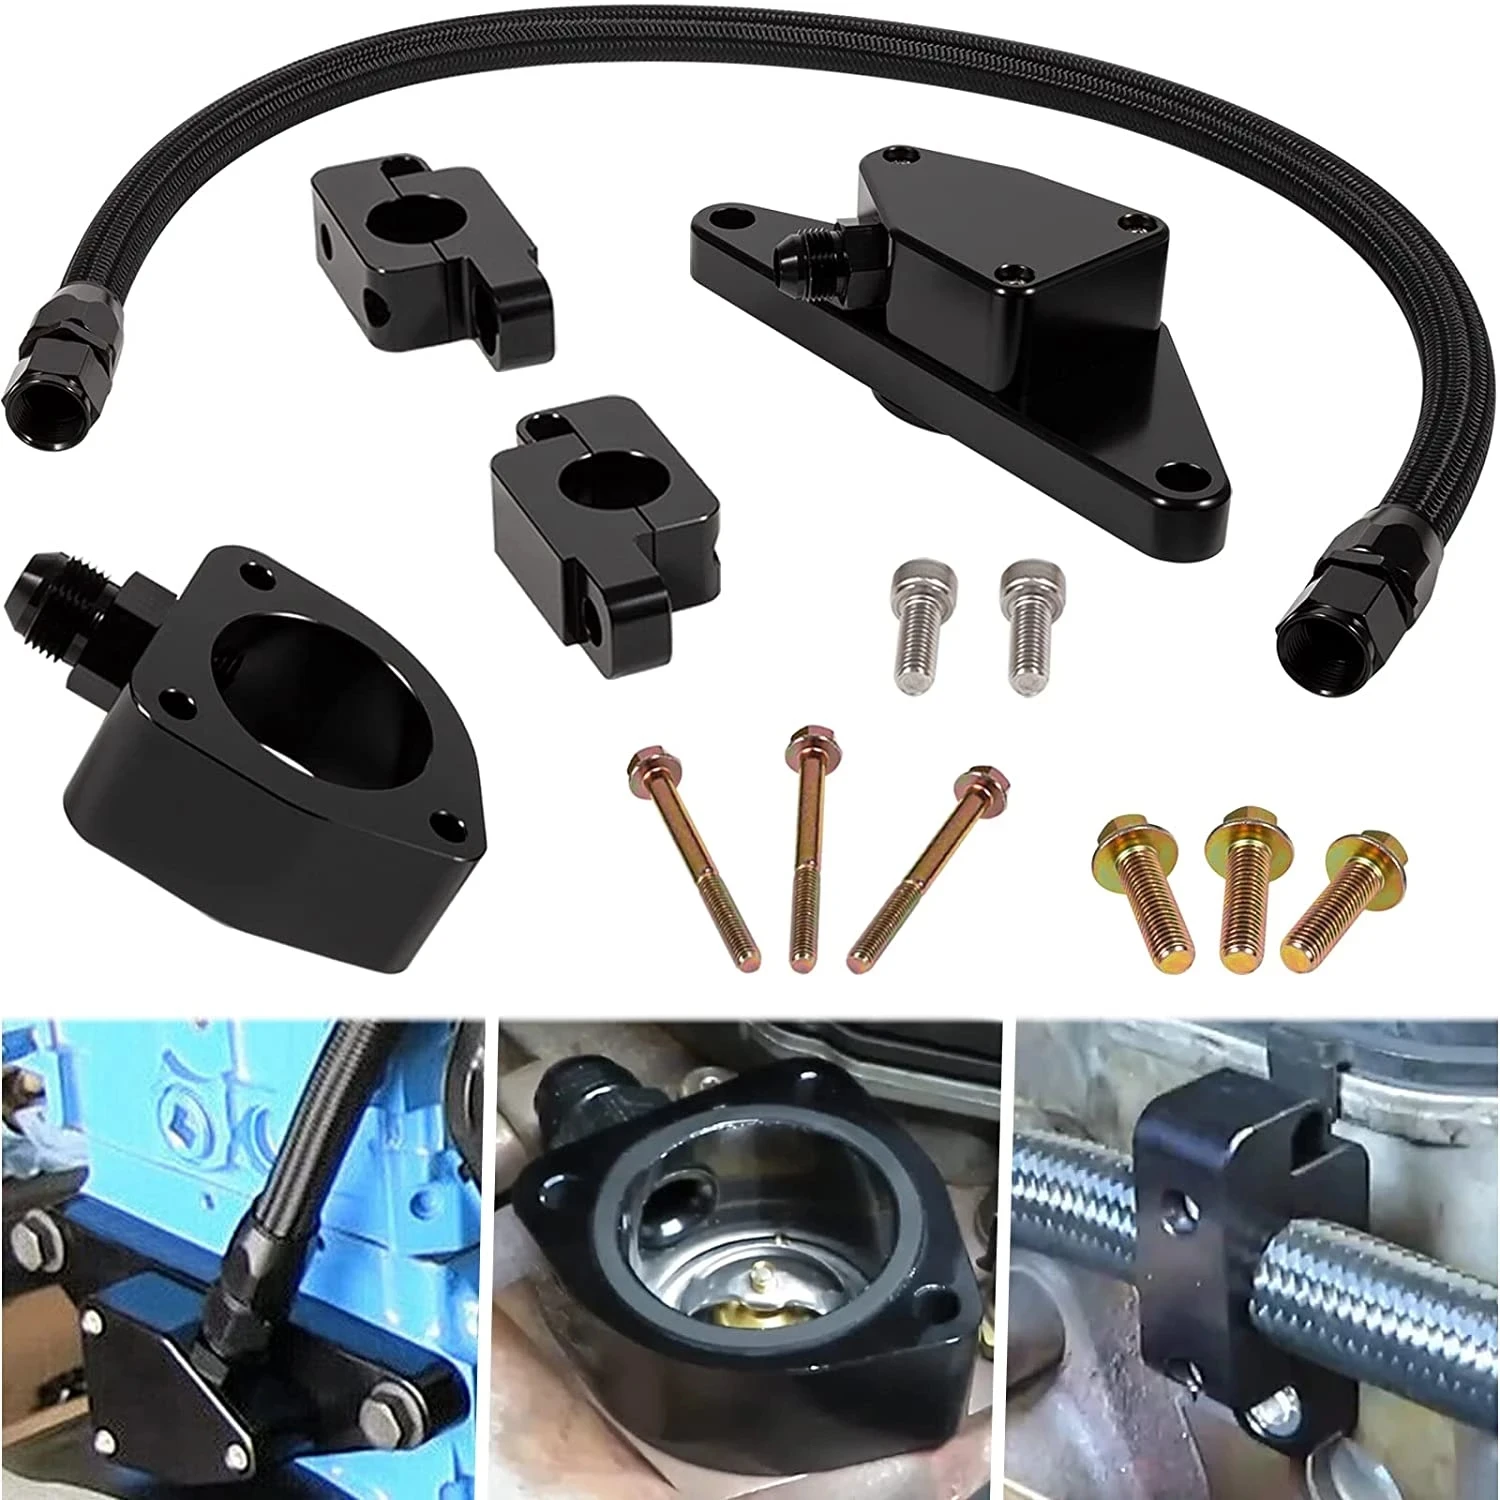 

TM Coolant Bypass Kit Perfectly Compatible with 2007.5-2018 Dodge Ram 6.7L Cummins Diesel Engines Car Accessories